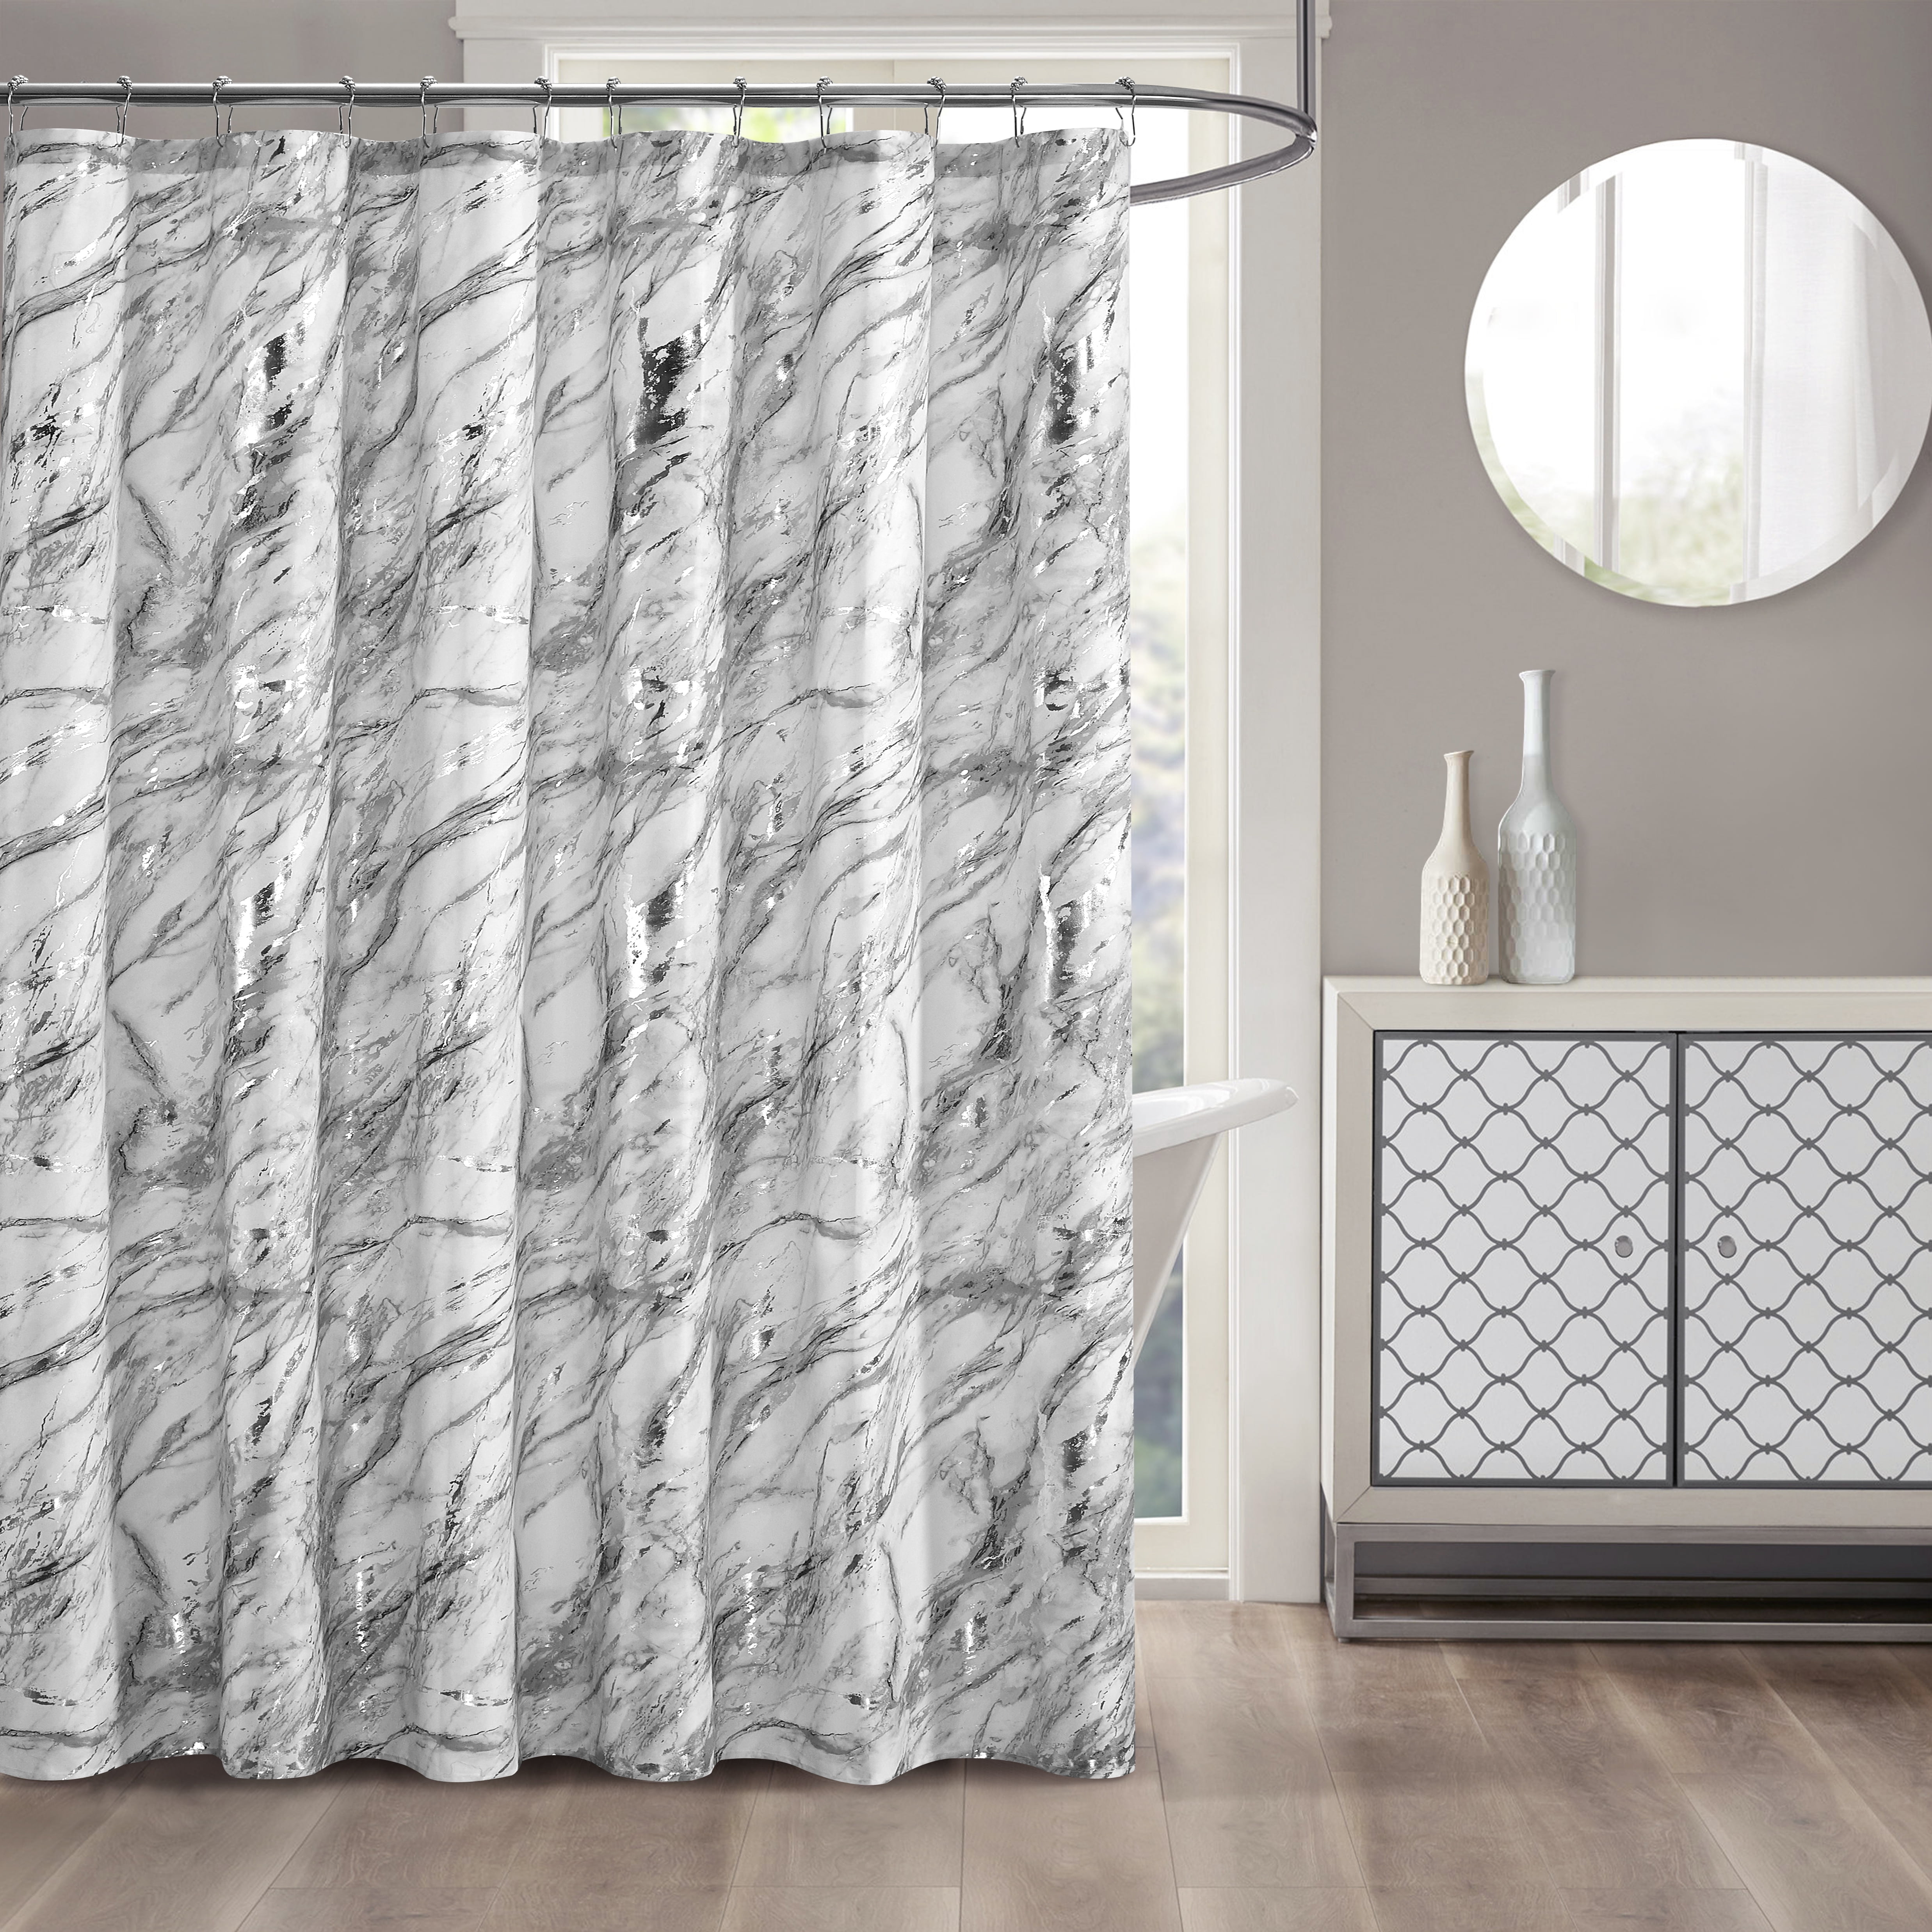 White 72x72 Unique Bath Accessories Abstract Granite Marble Fabric Shower Curtain Gibelle Grey Marble Shower Curtain for Bathroom Modern Luxury Art Waterproof Shower Curtain Set for Men and Women 